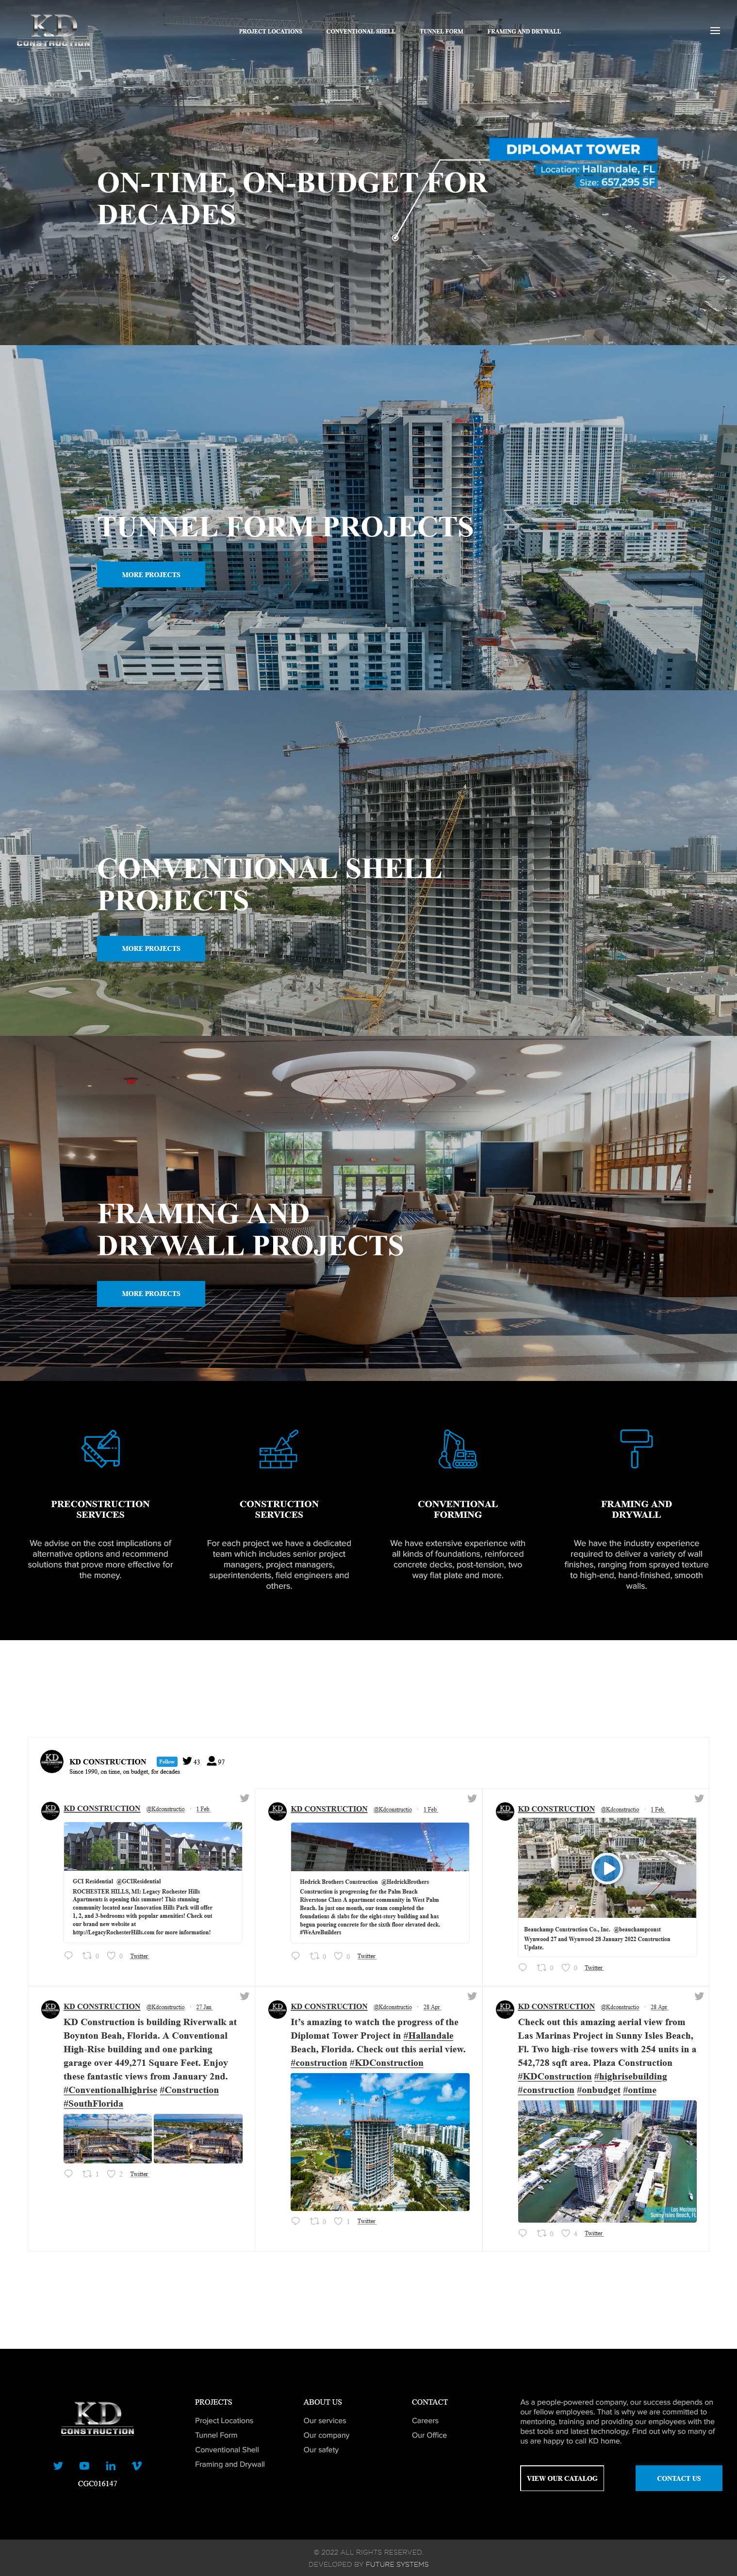 KD Construction's website based out of Pompano Beach, FL.